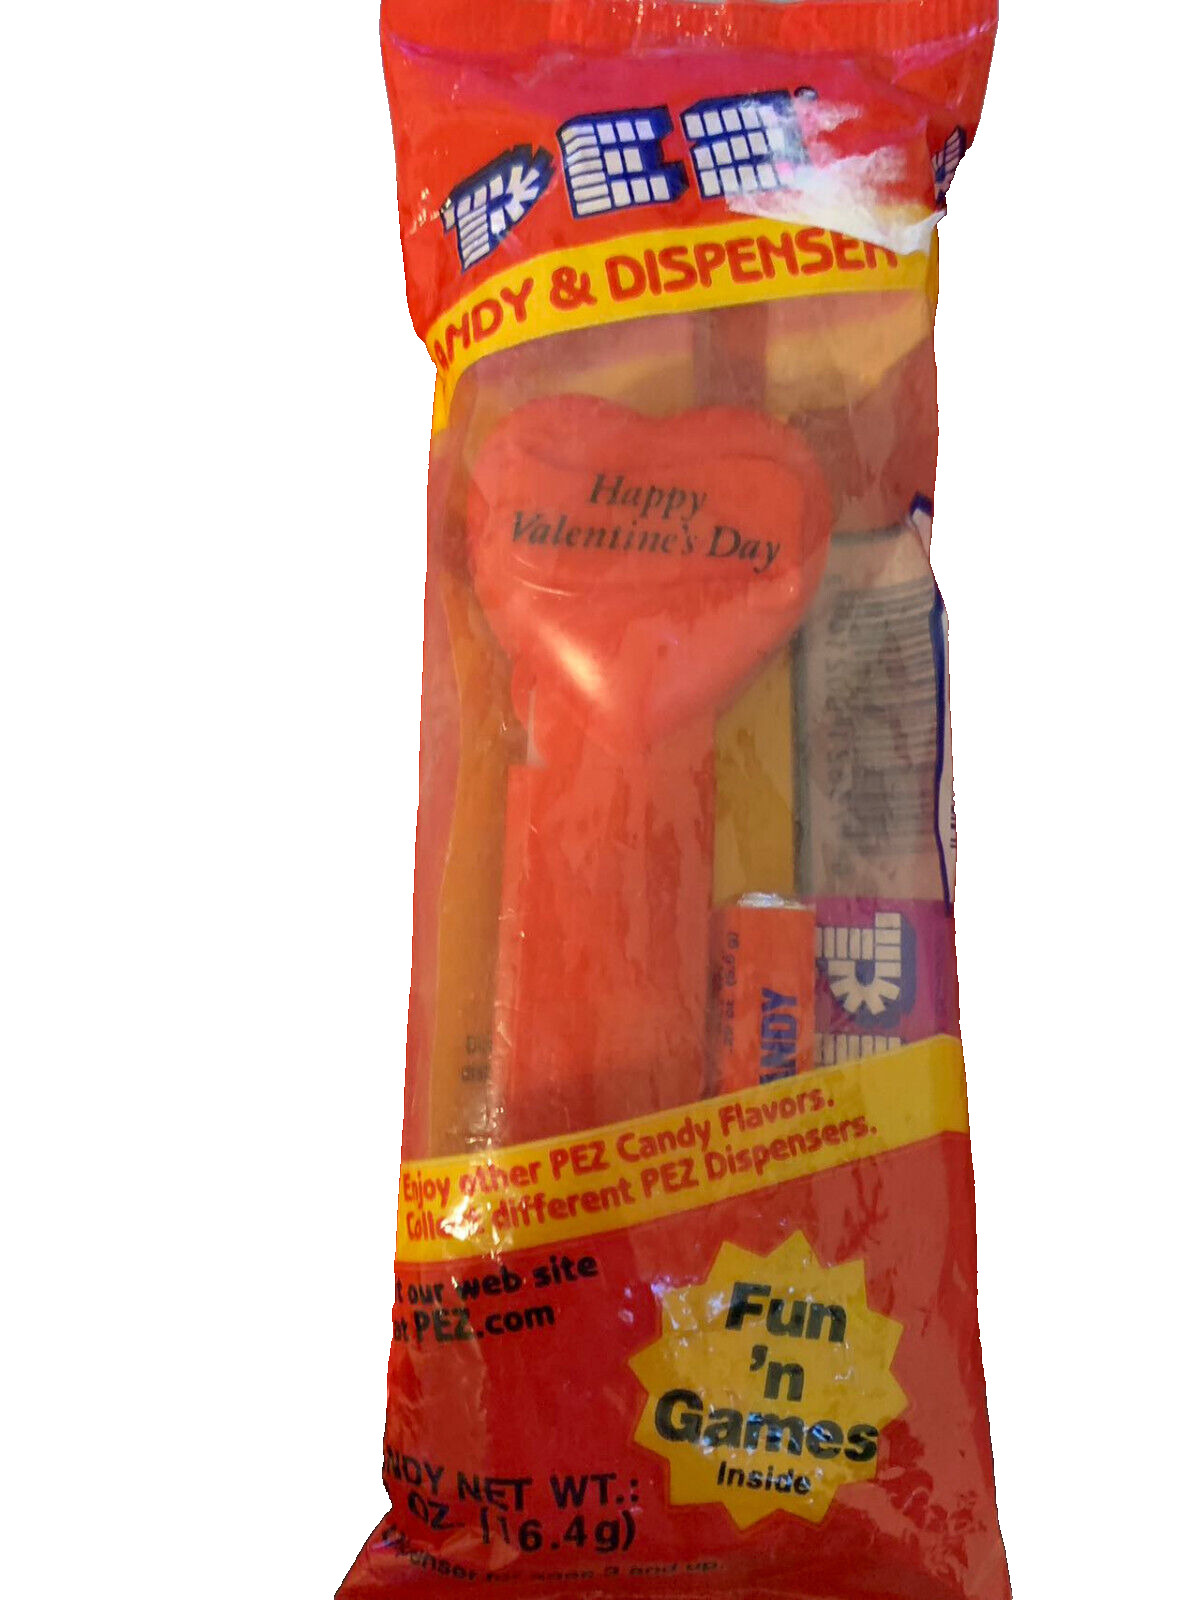 Vintage RED PEZ Dispensers No Feet Hearts Happy Valentines Day 1996 in bag